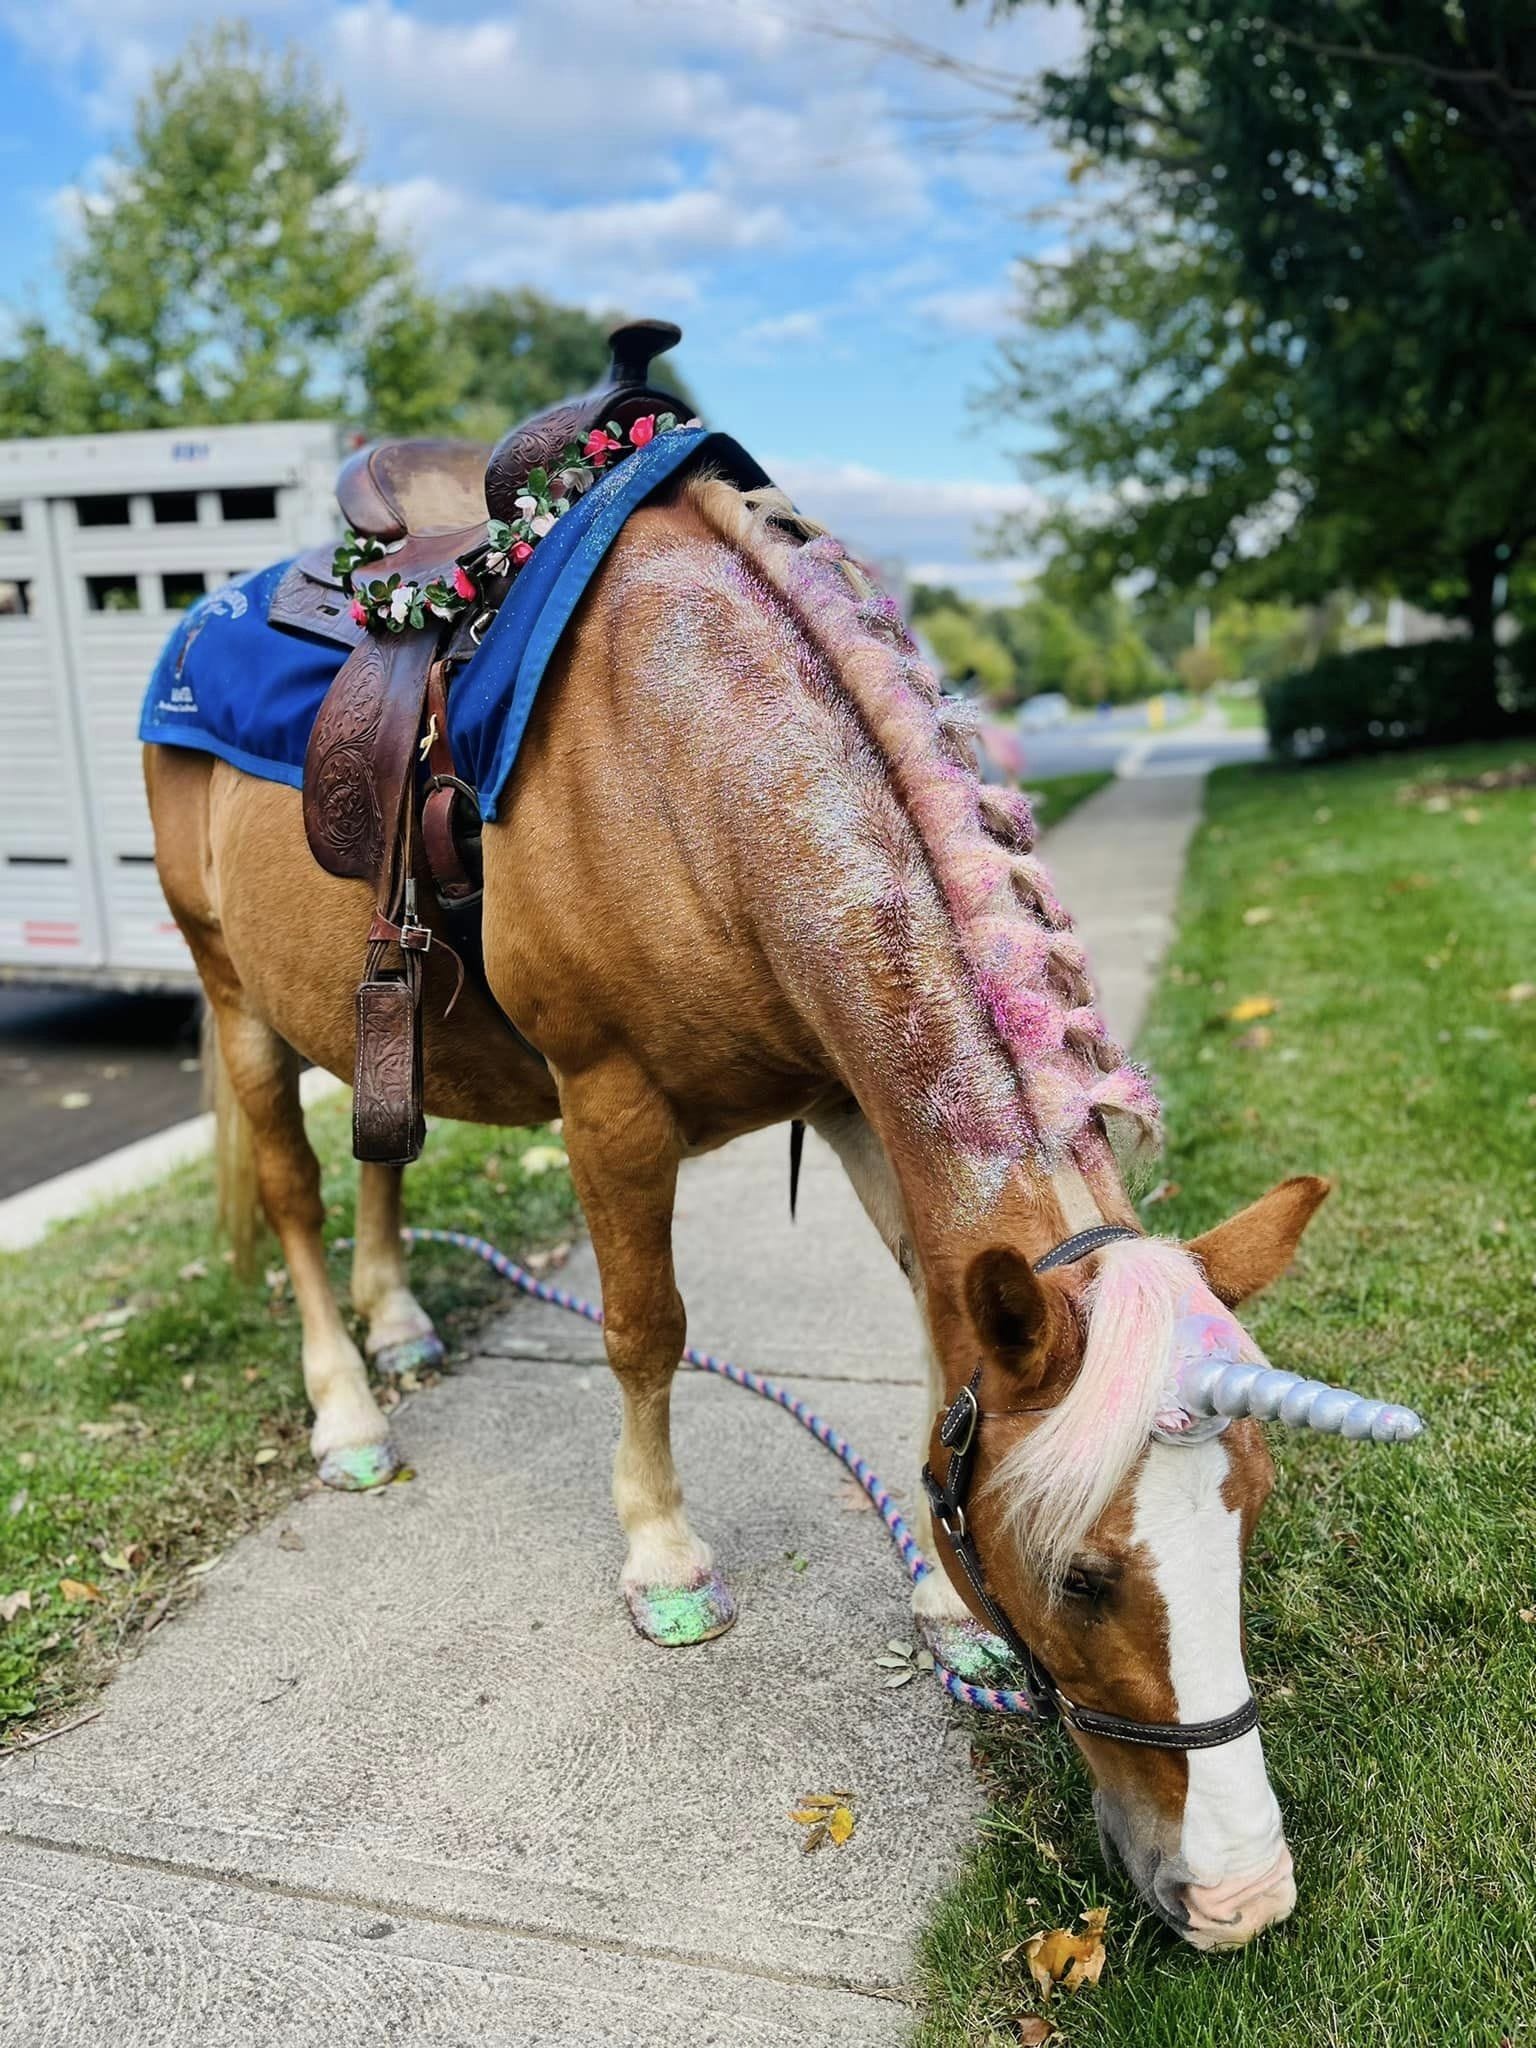 unicorn rental near me
rent a pony near me
horse rides for parties
pony ride and petting zoo
pony ride services
pony ride service
horse riding farm ohio